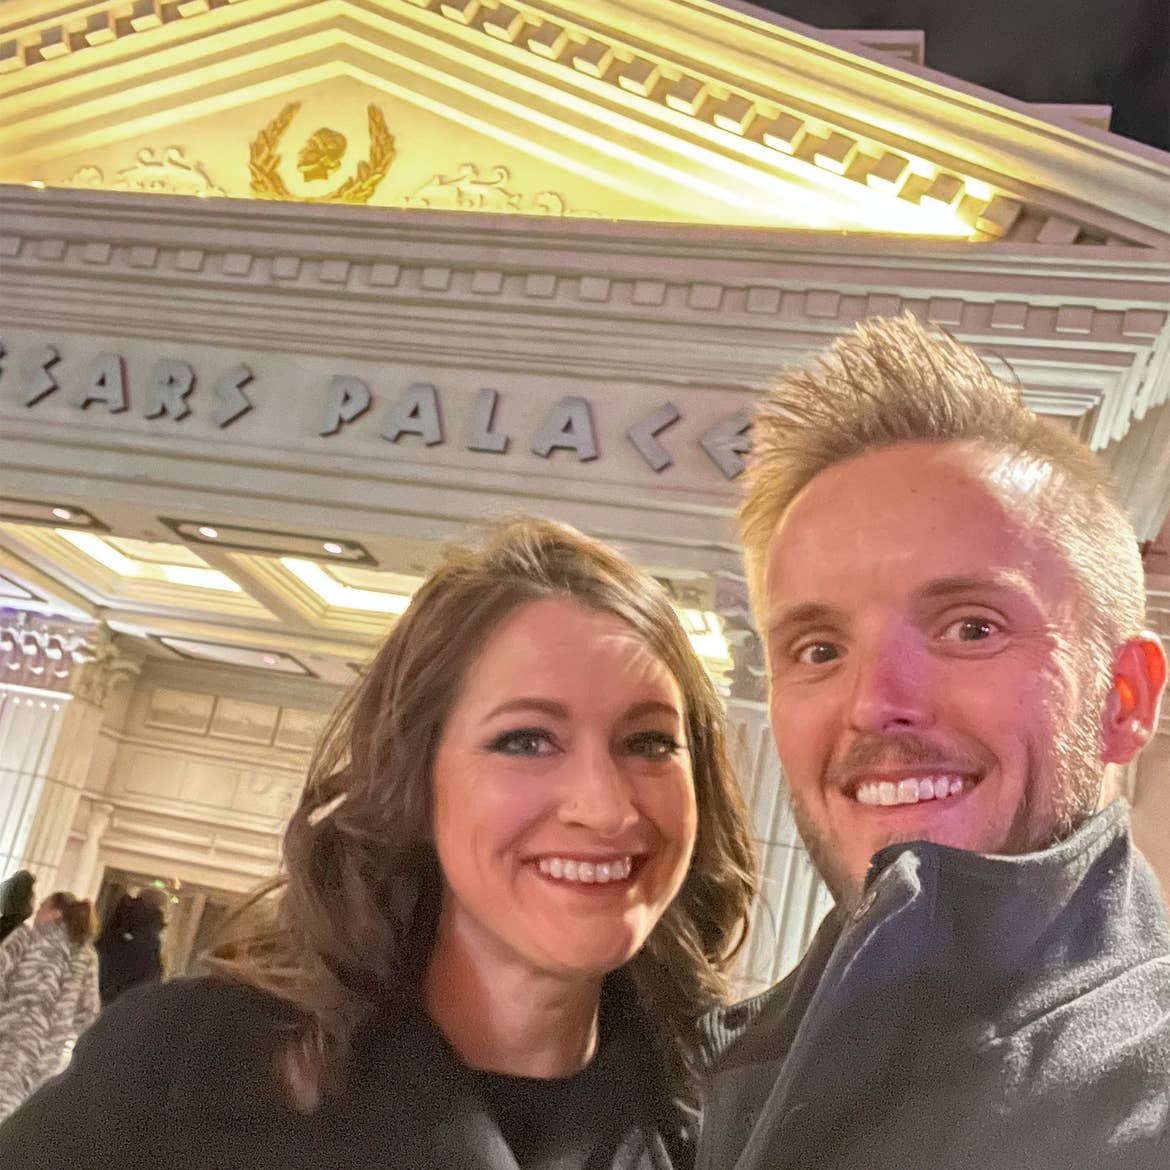 A woman and man wearing black jackets stand outside of the Caesars Palace Casino during the night.